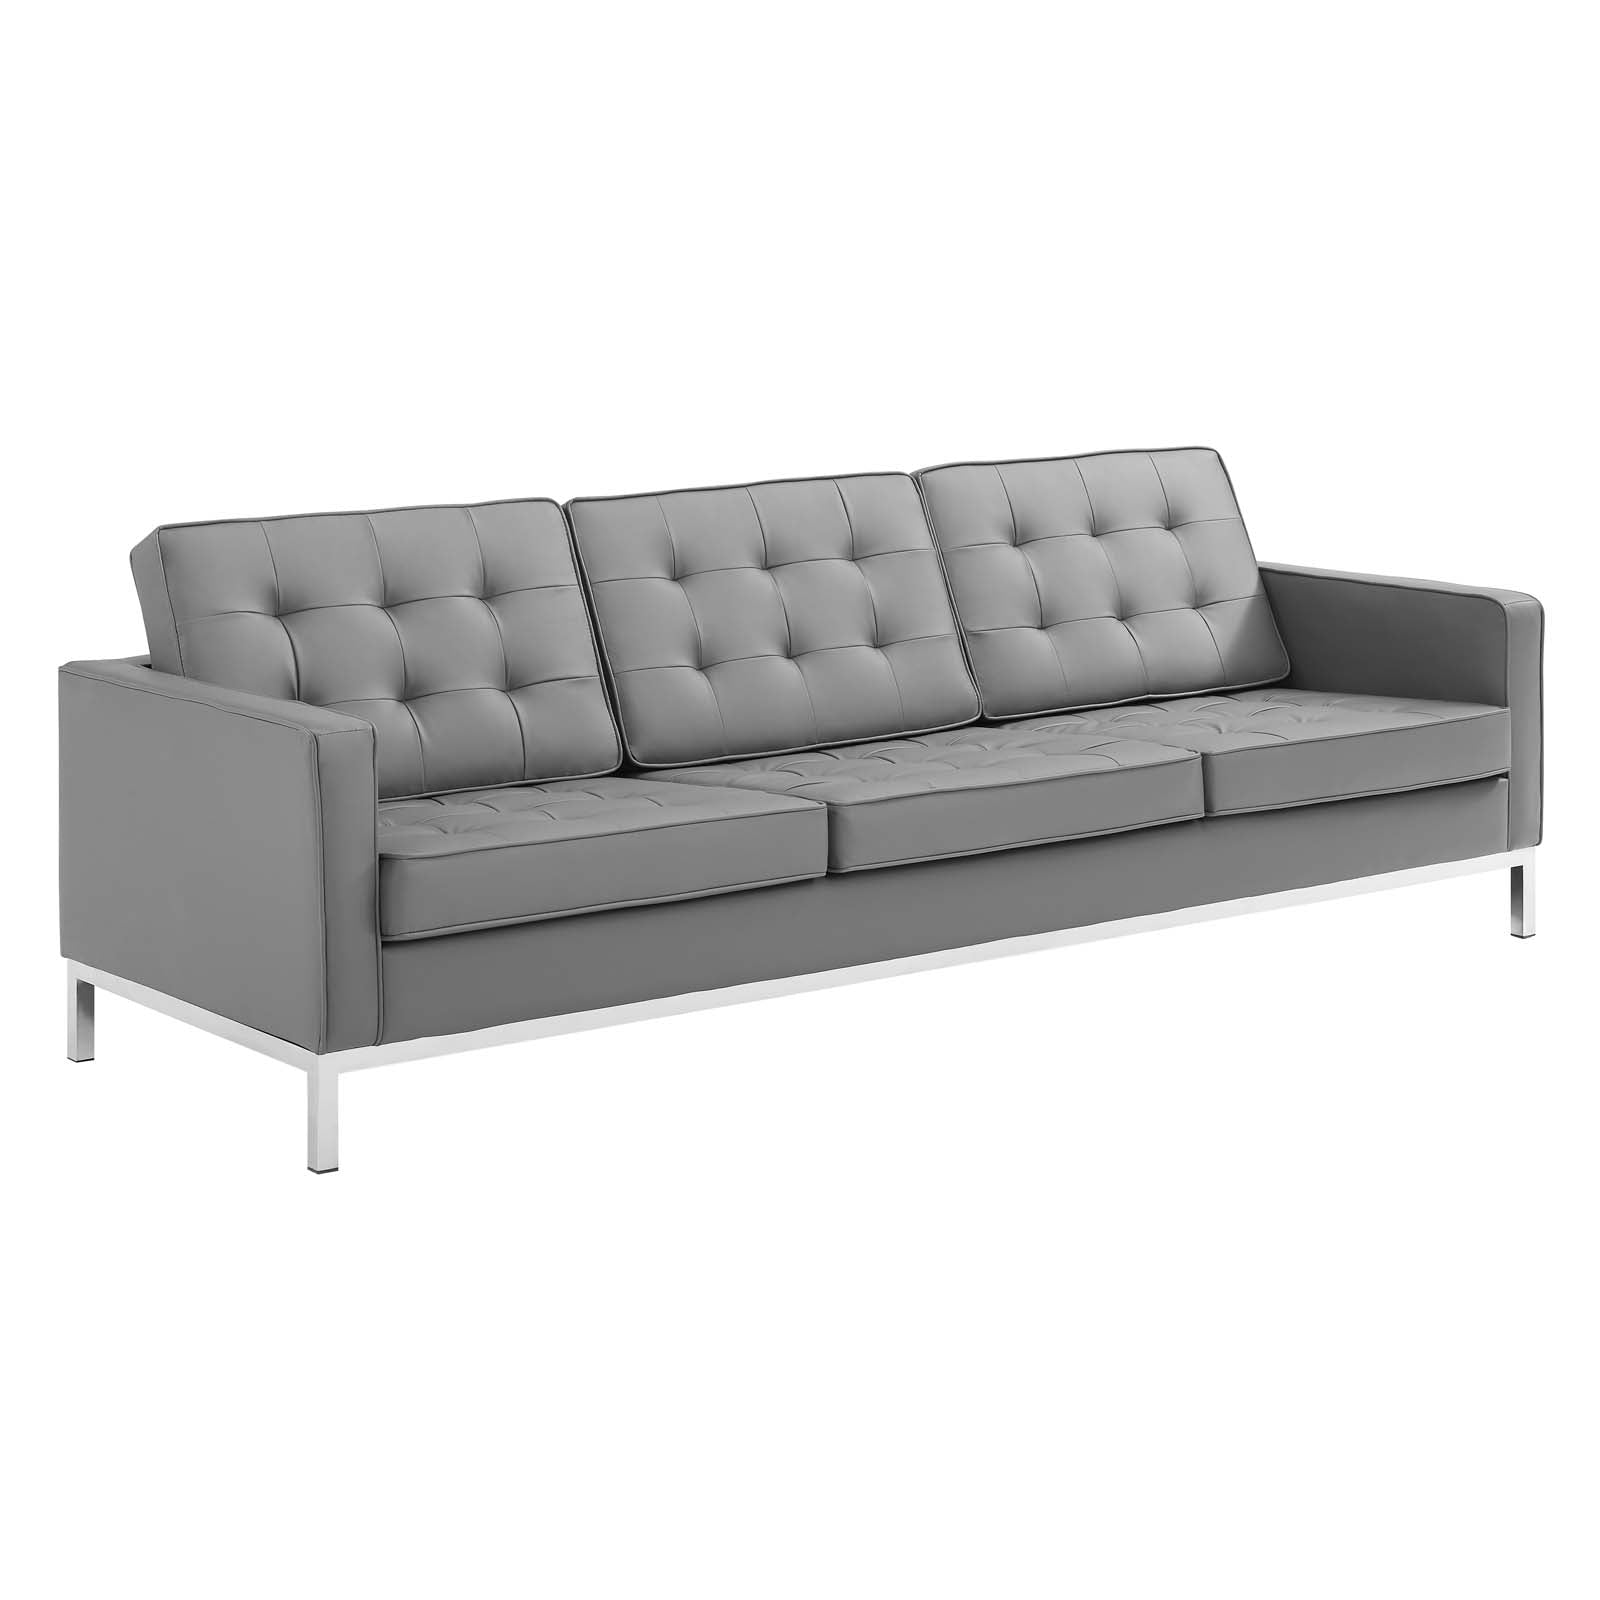 Modway Sofas & Couches - Loft Tufted Upholstered Faux Leather Sofa Silver Gray